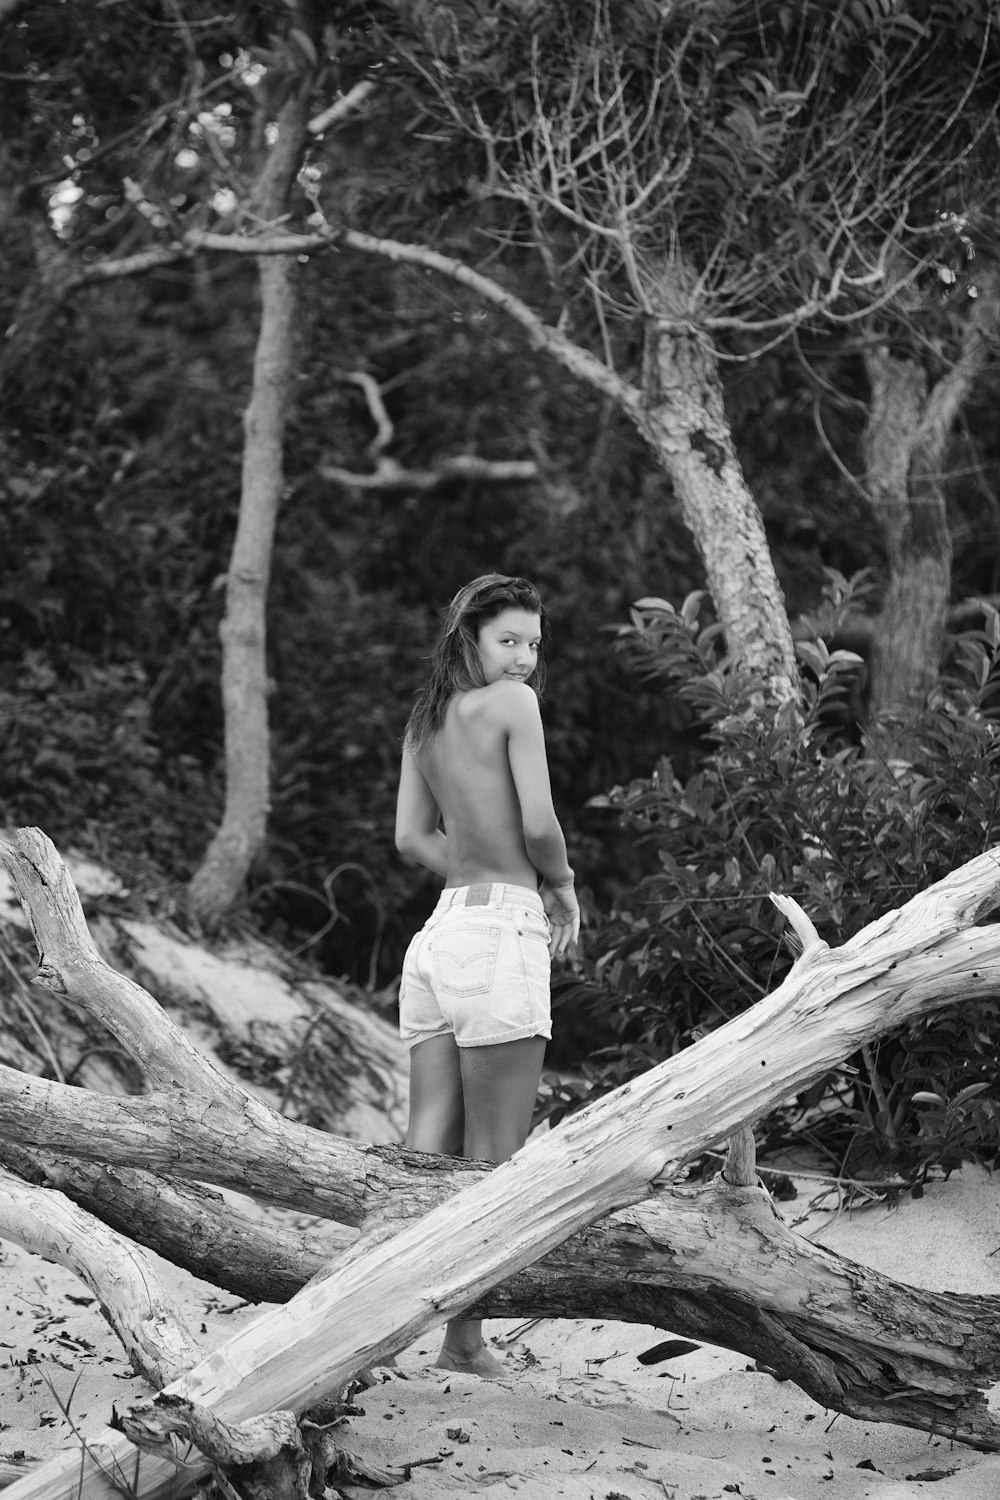 woman in white shorts standing on tree log in grayscale photography